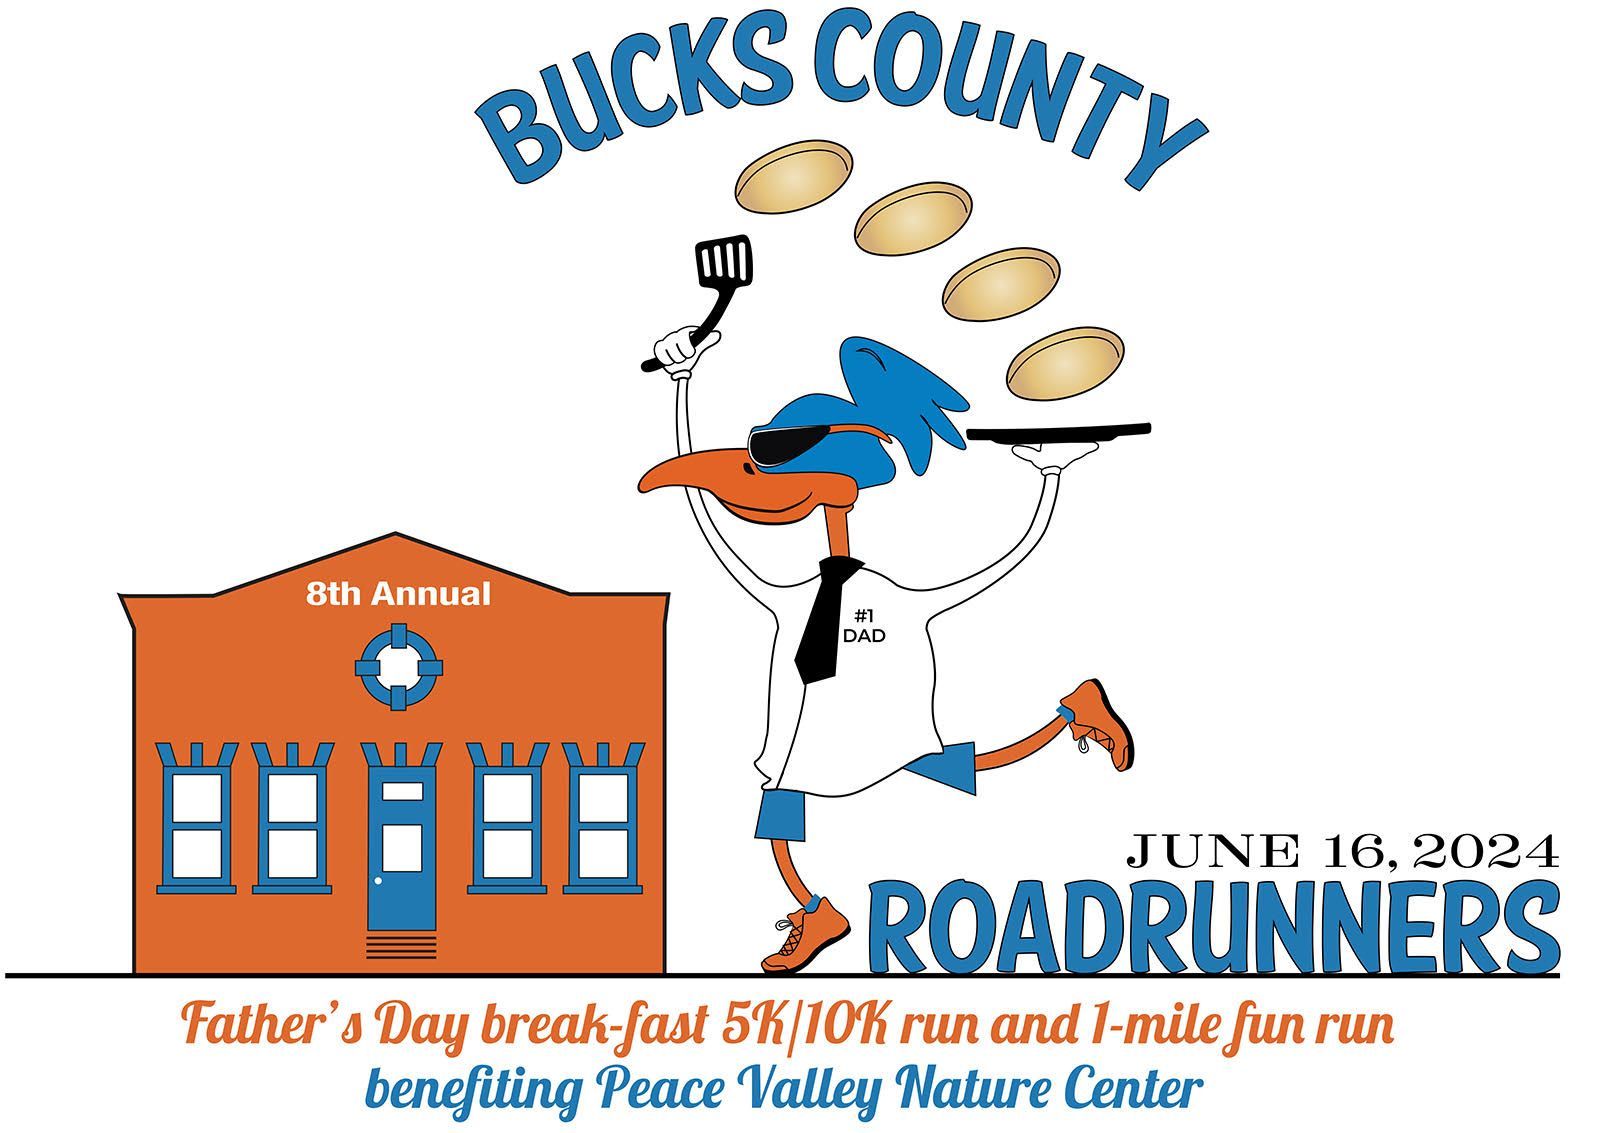 A poster for bucks county roadrunners on june 18th